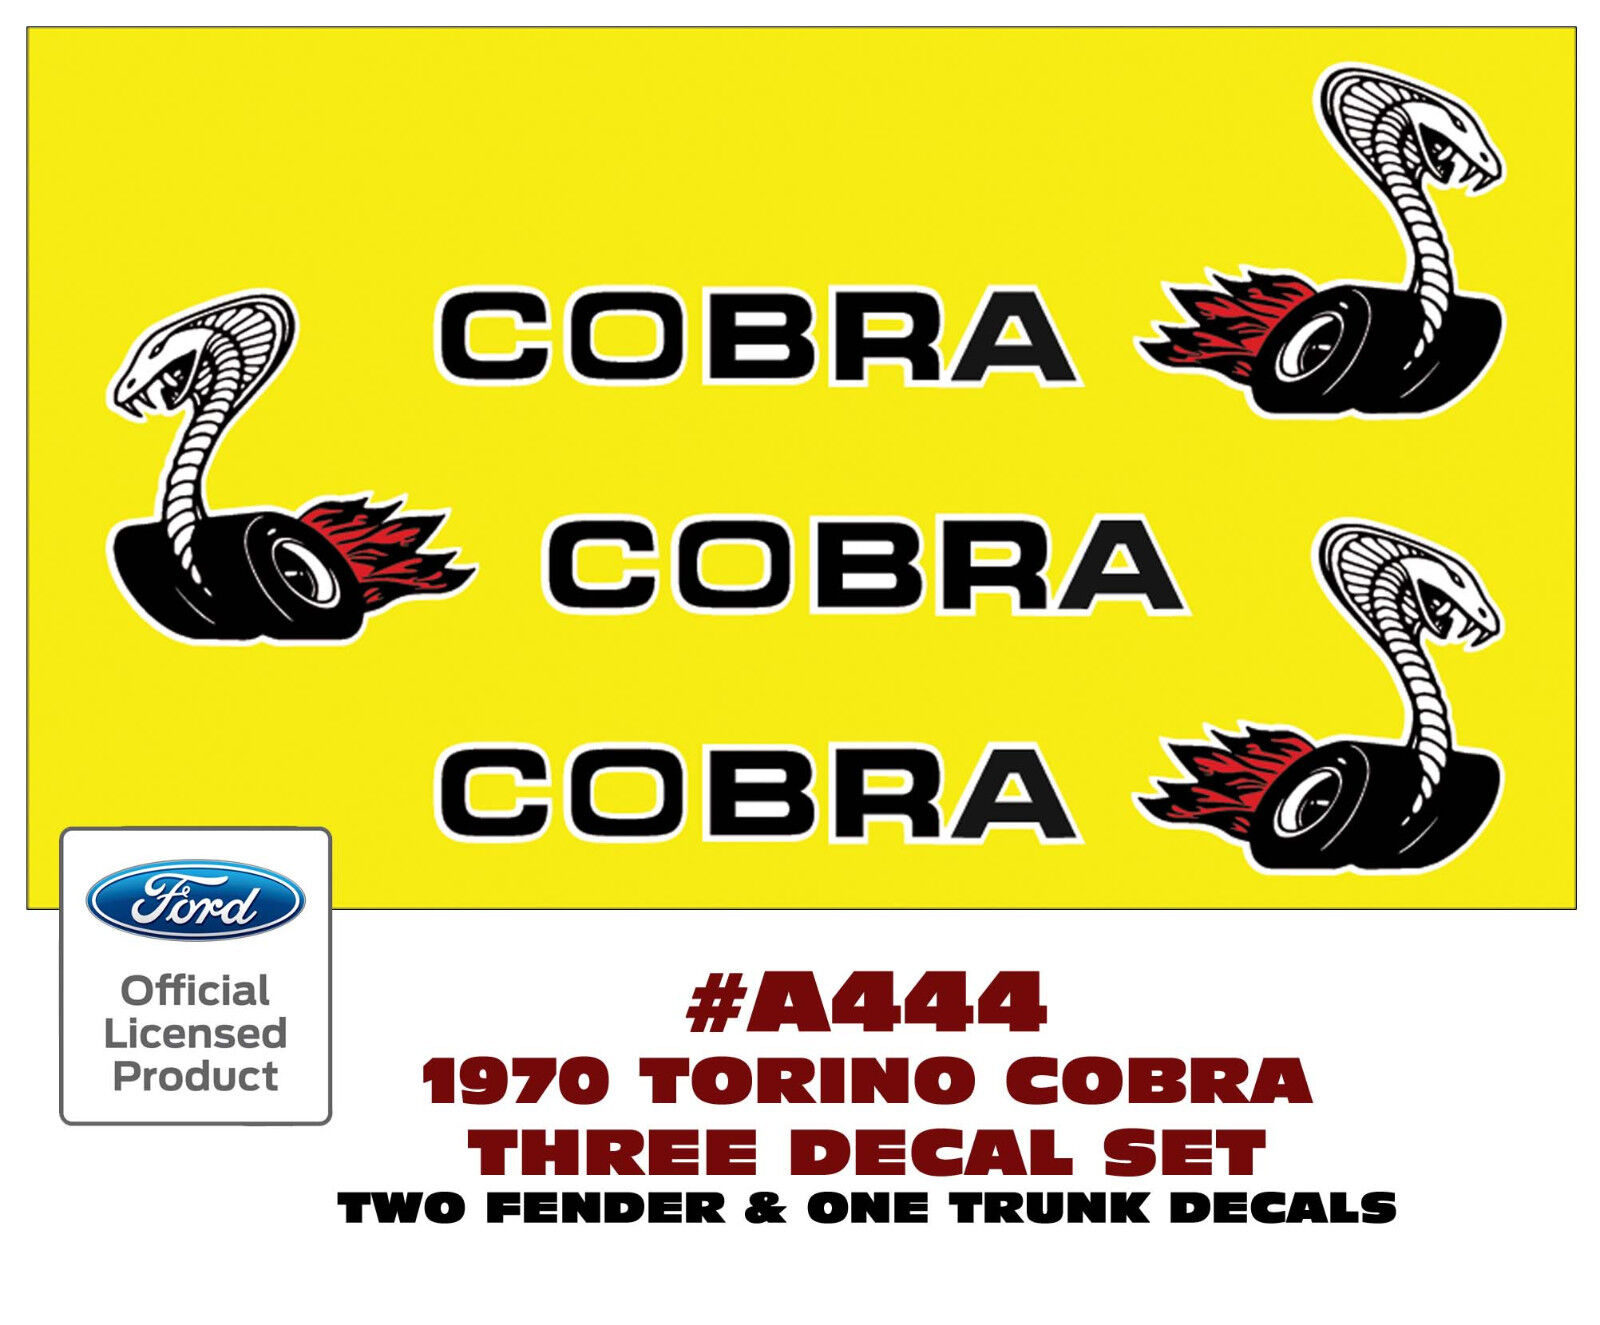 A444 1970 FORD TORINO - COBRA SNAKE DECAL KIT - 3 PIECES - SIDES and TRUNK